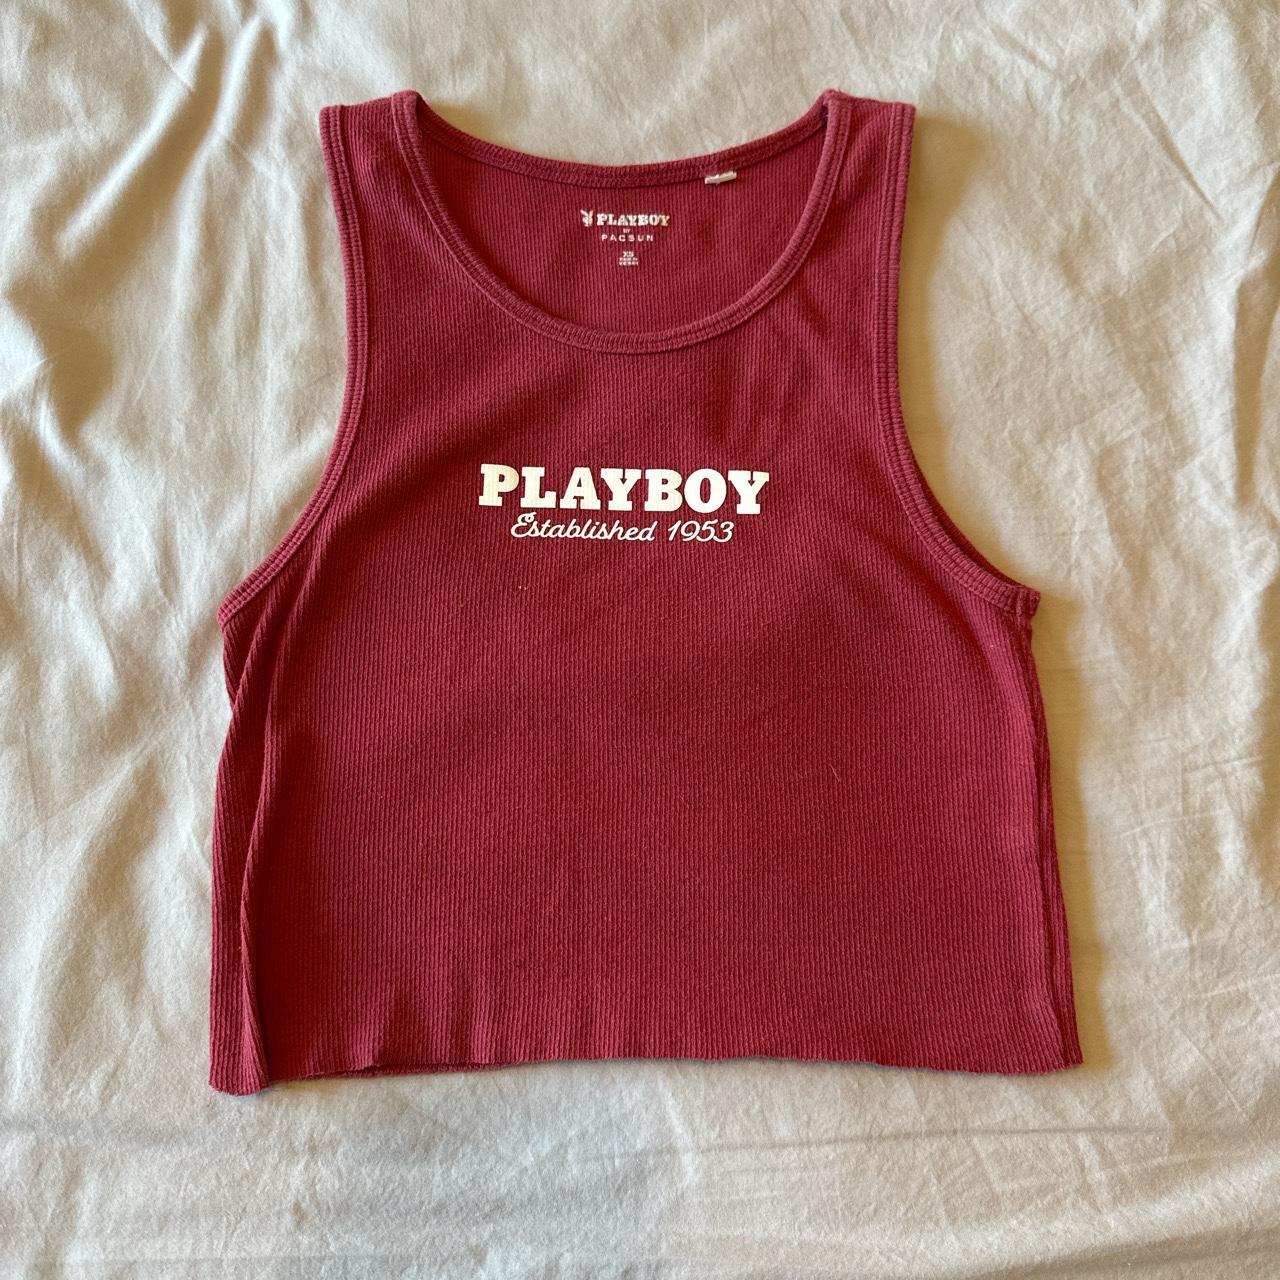 Cropped Playboy red tank top from Pacsun Size: XS,... - Depop